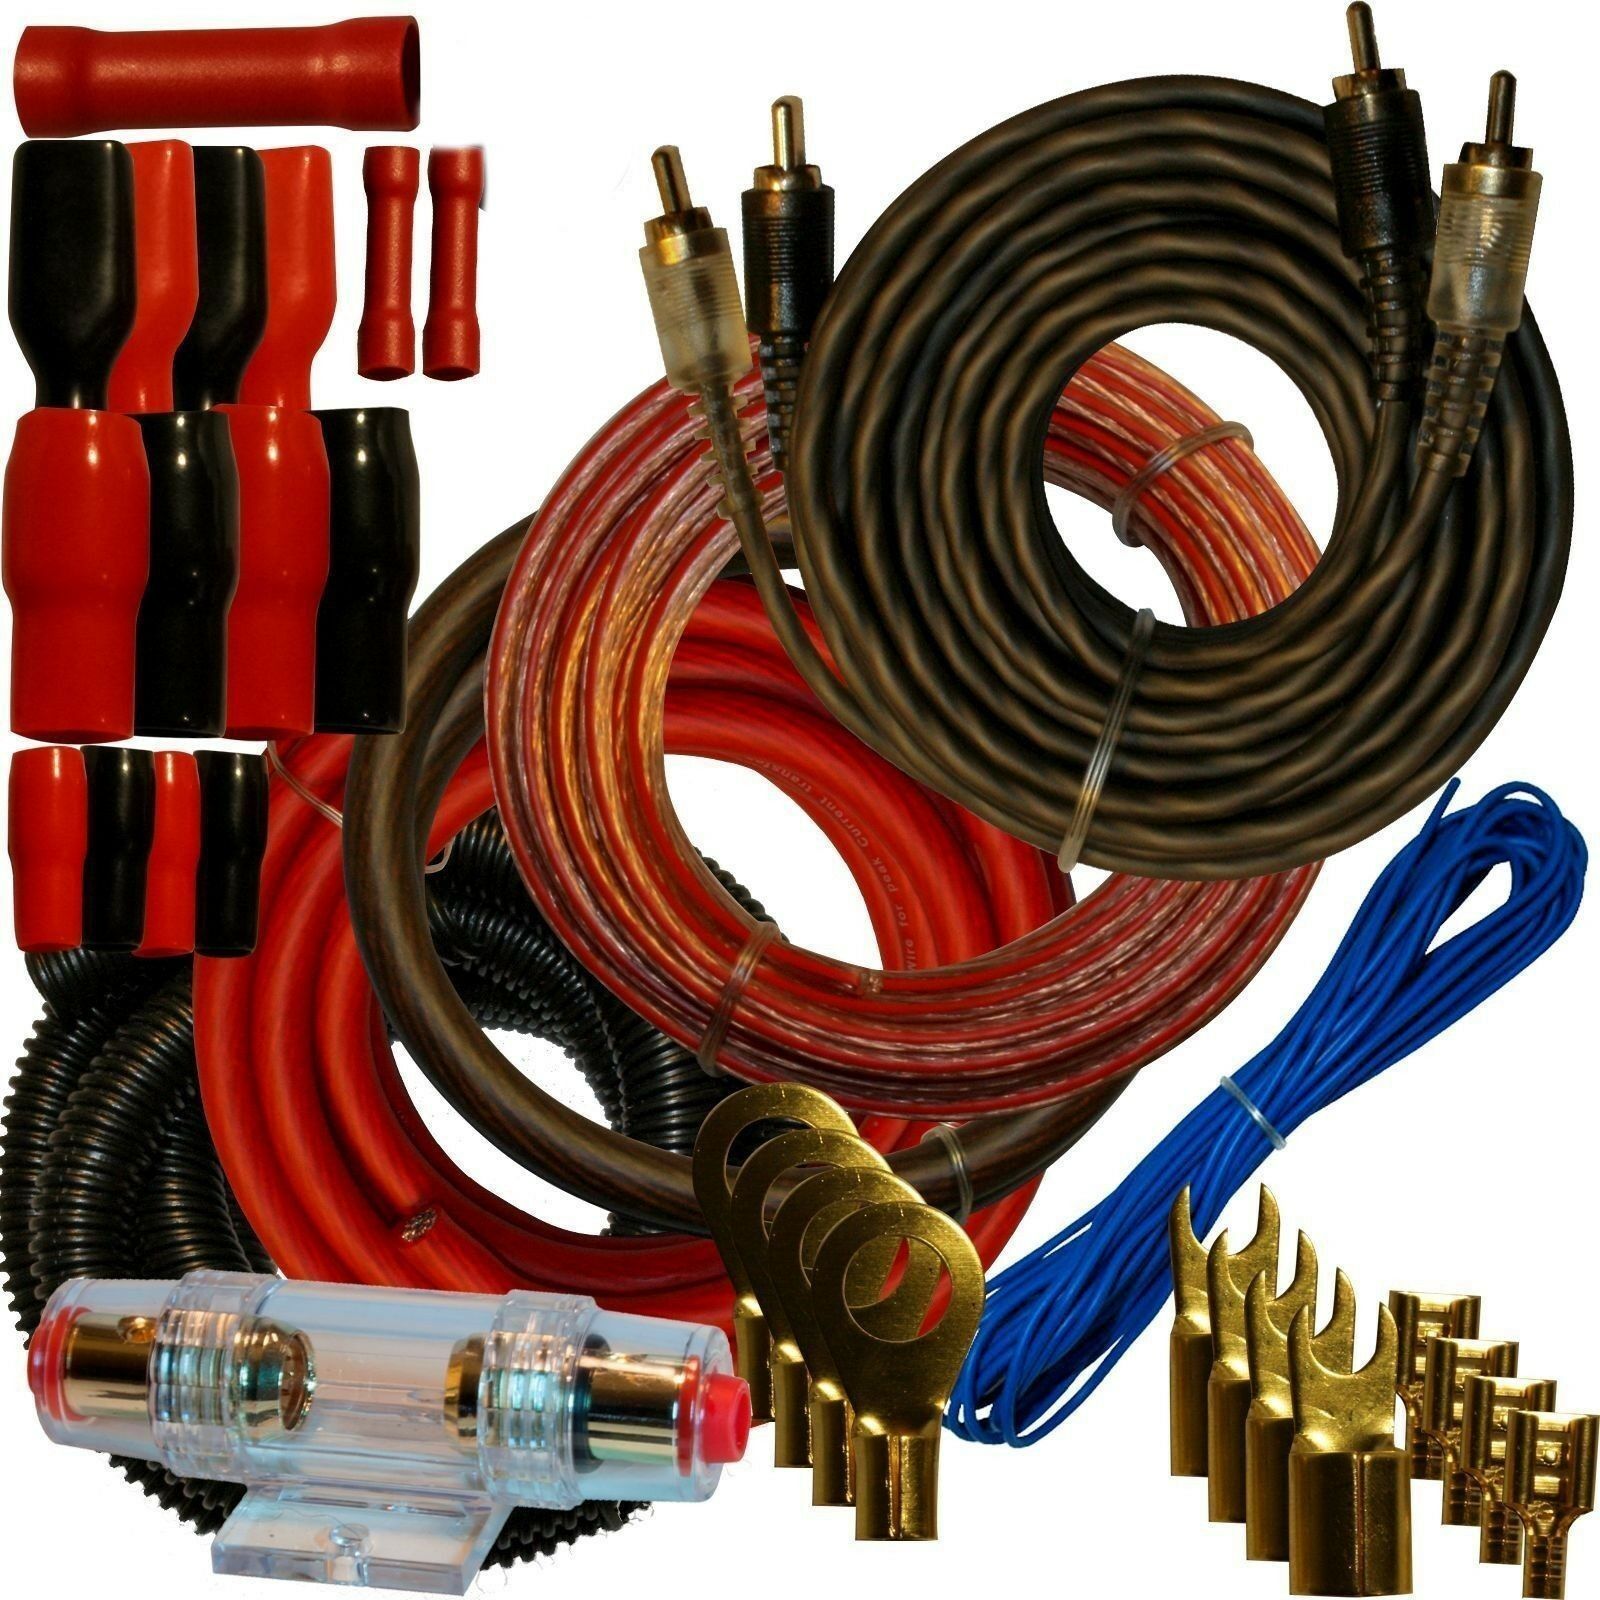 4 Gauge Amplfier Power Kit For Amp Install Wiring Complete Rca Cable Red 2800w